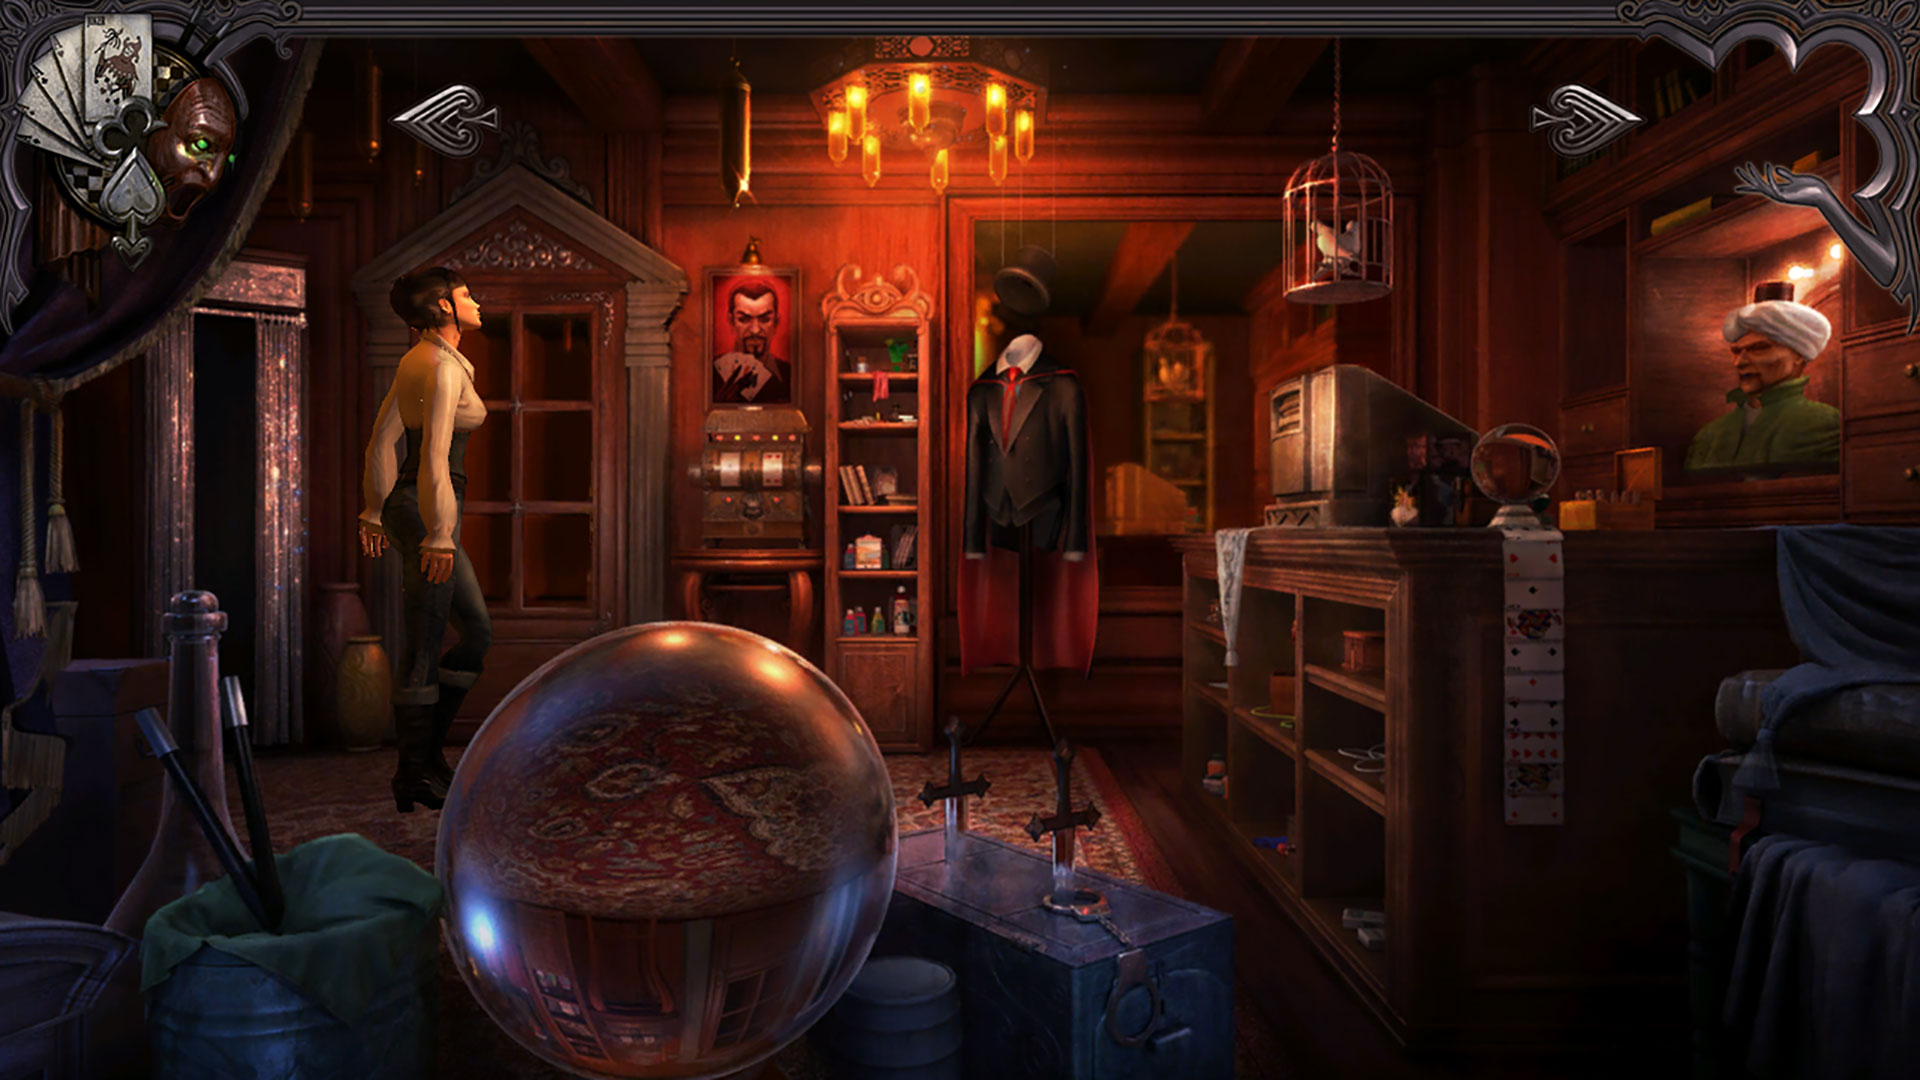 The Black Wand magic shop, Oxford, in Gray Matter adventure game screenshot | Inky Squiggles